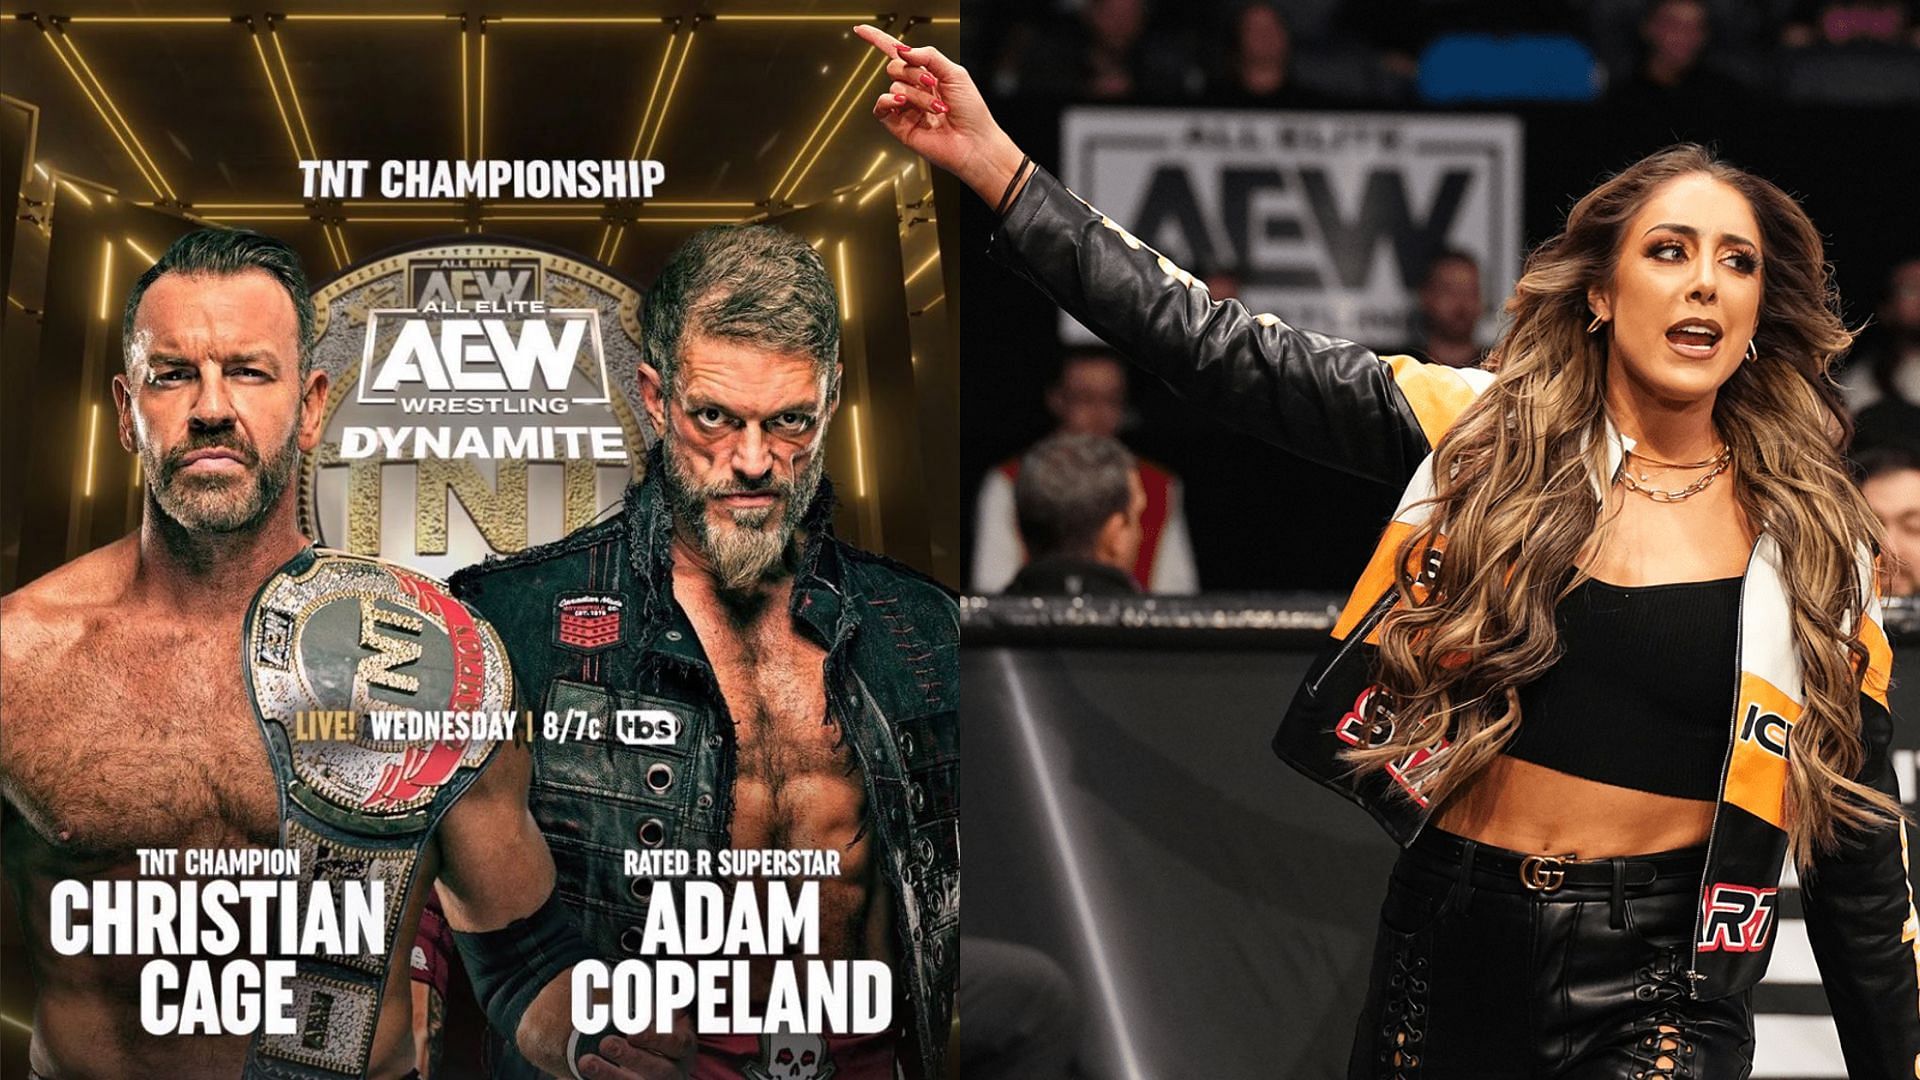 Adam Copeland and Christian Cage are set to do battle tonight on AEW Dynamite